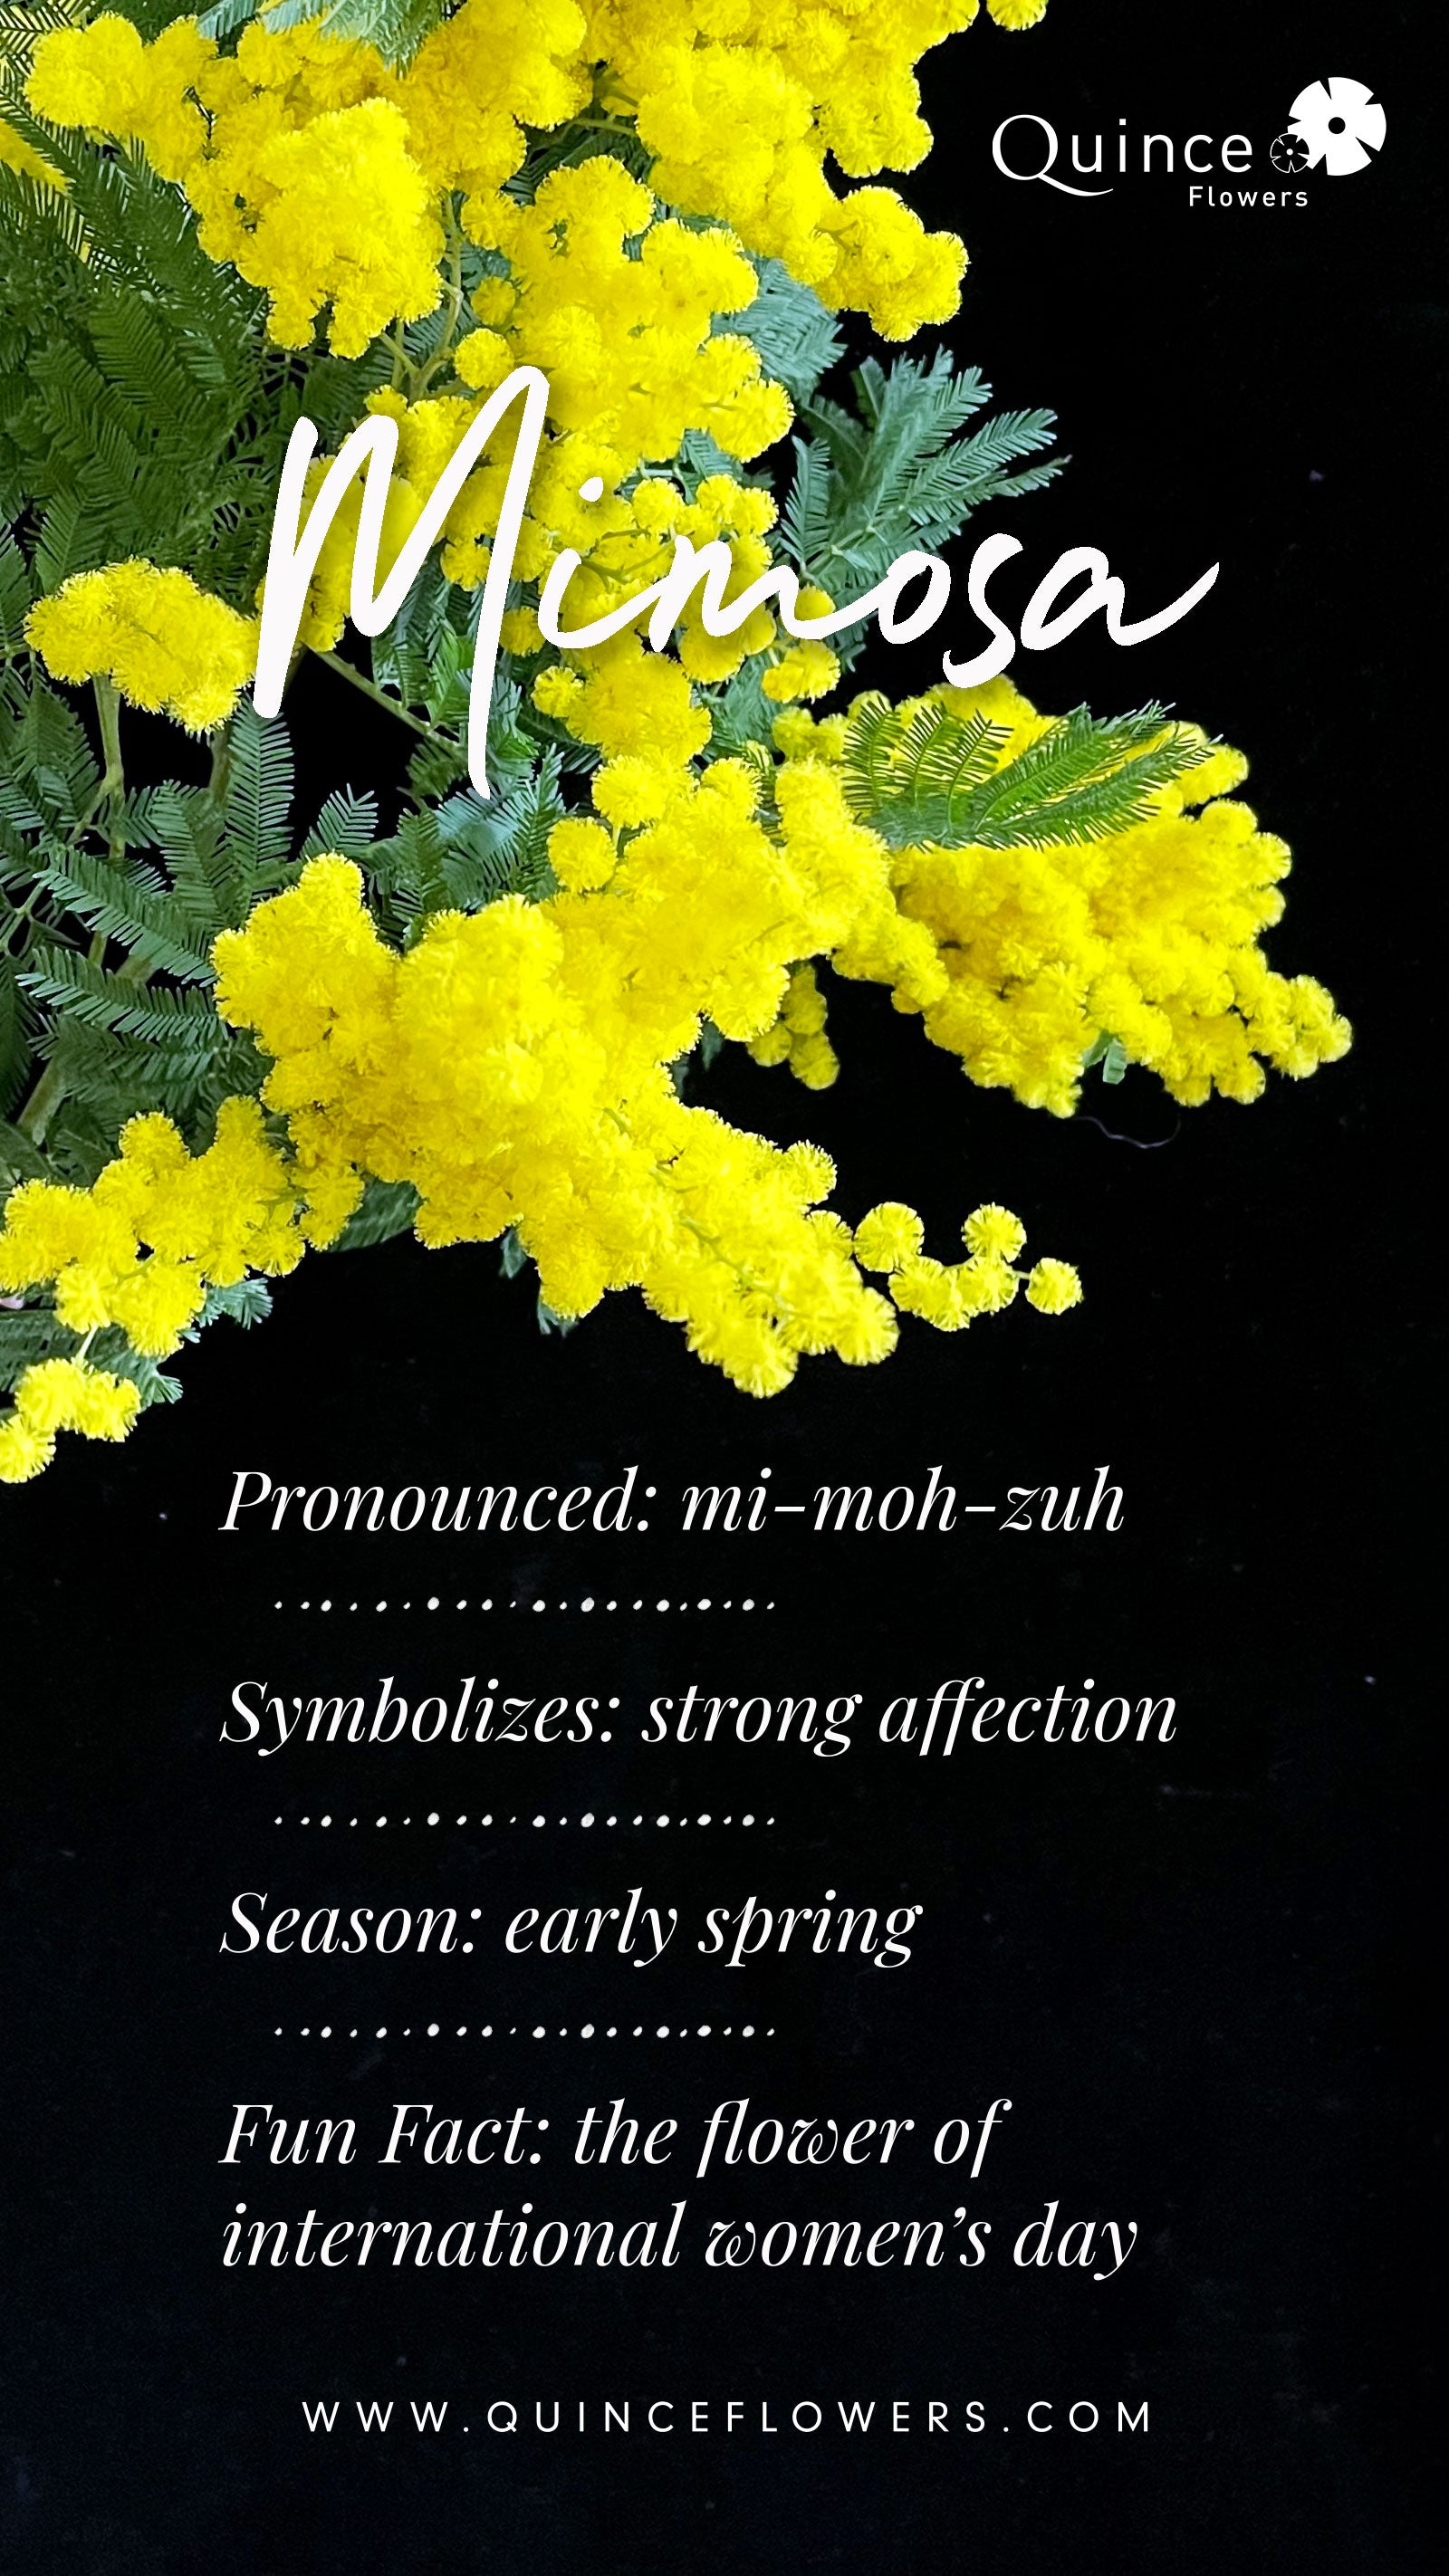 bright yellow mimosa flowers against a dark background. These delicate flowers are in full bloom, creating a vibrant contrast. Order online for plants & flowers from the best florist in Toronto near you.